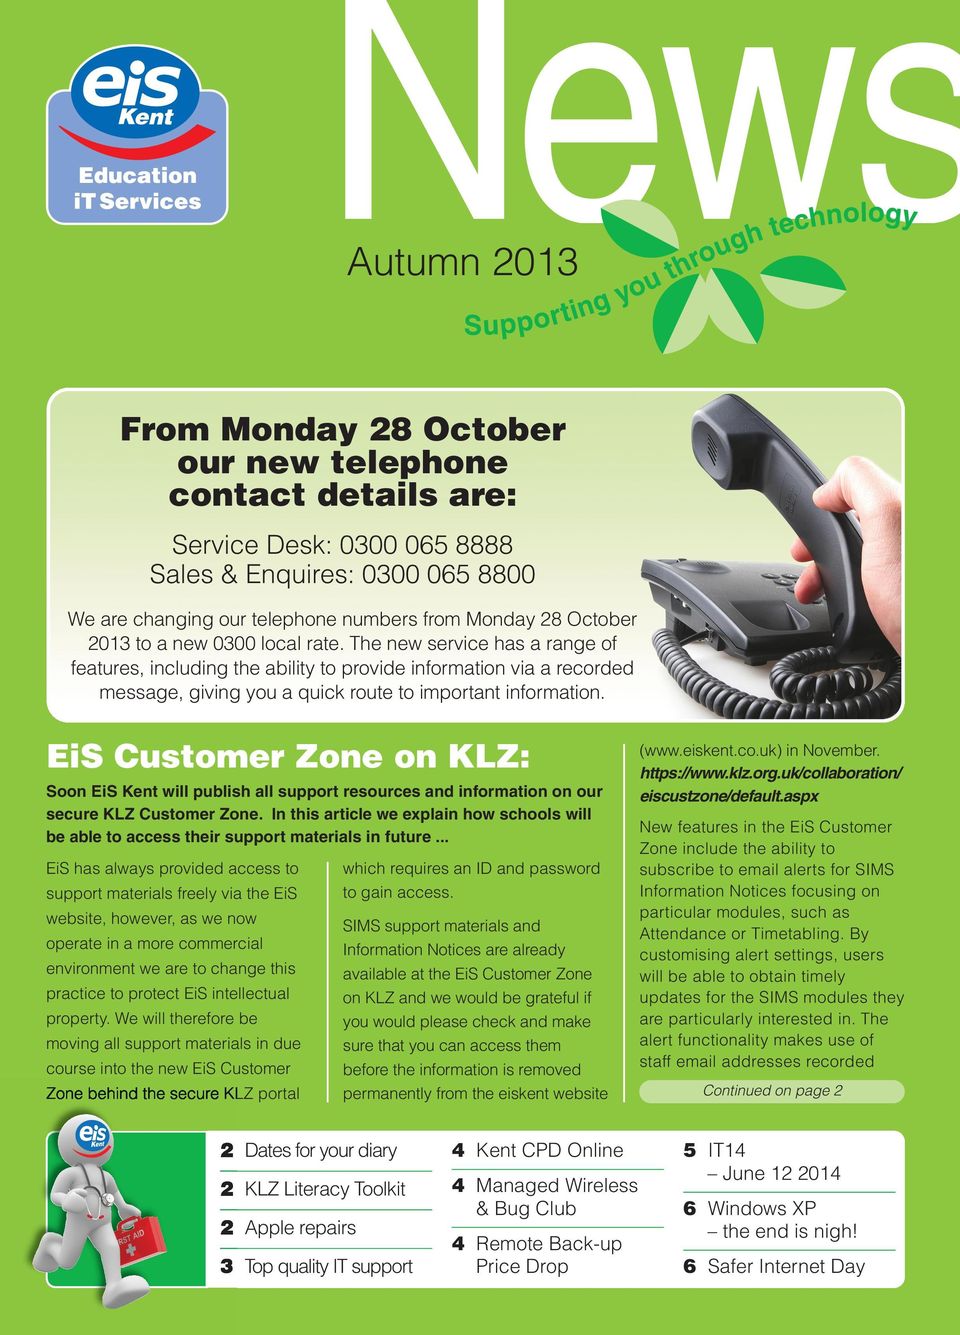 EiS Customer Zone on KLZ: Soon EiS Kent will publish all support resources and information on our secure KLZ Customer Zone.